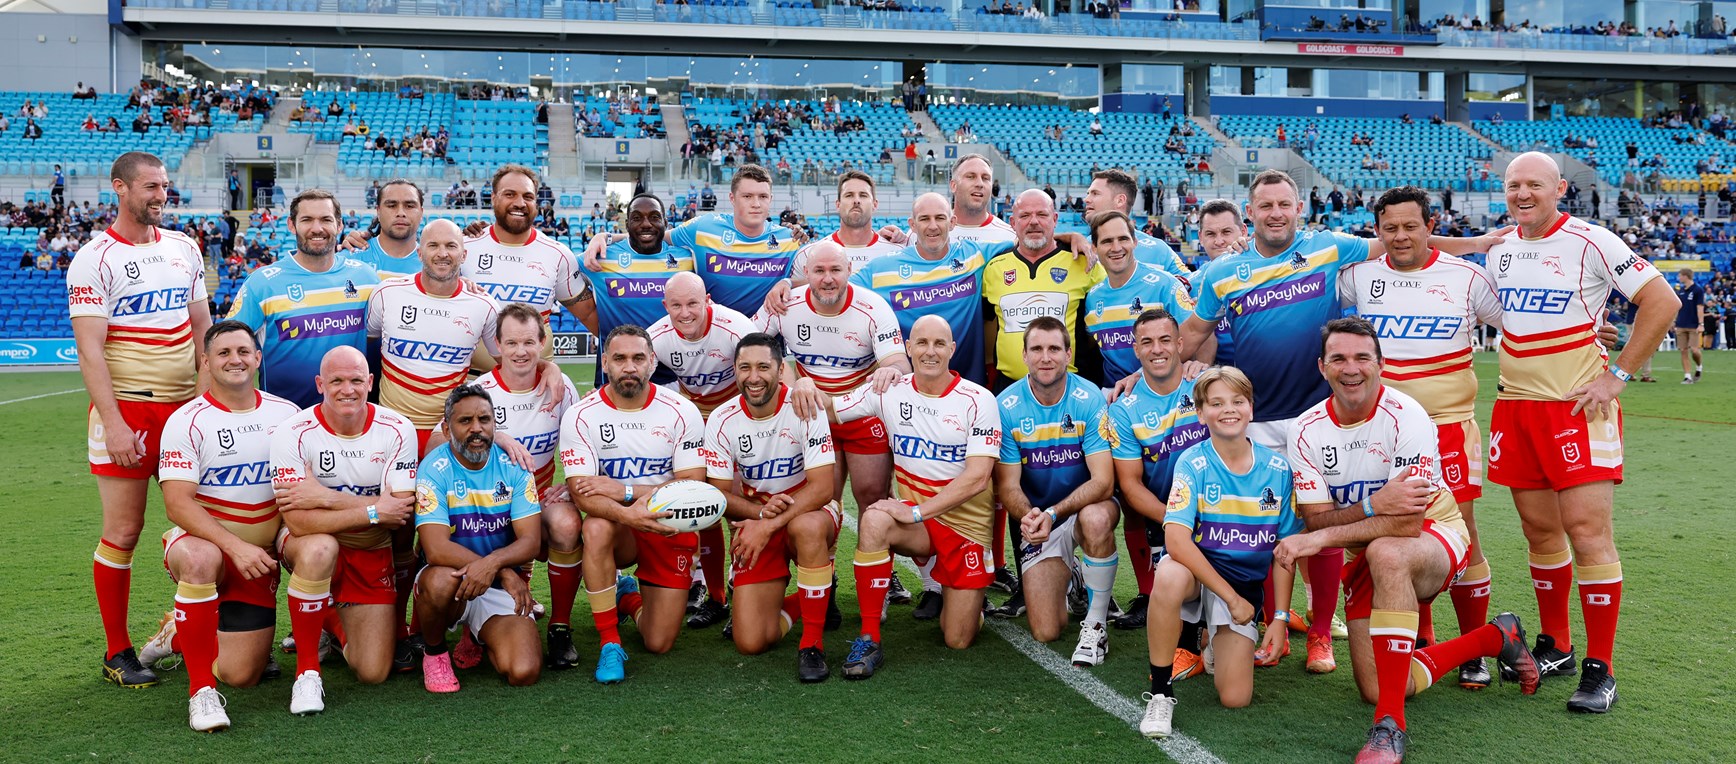 Gallery: All Stars charity match